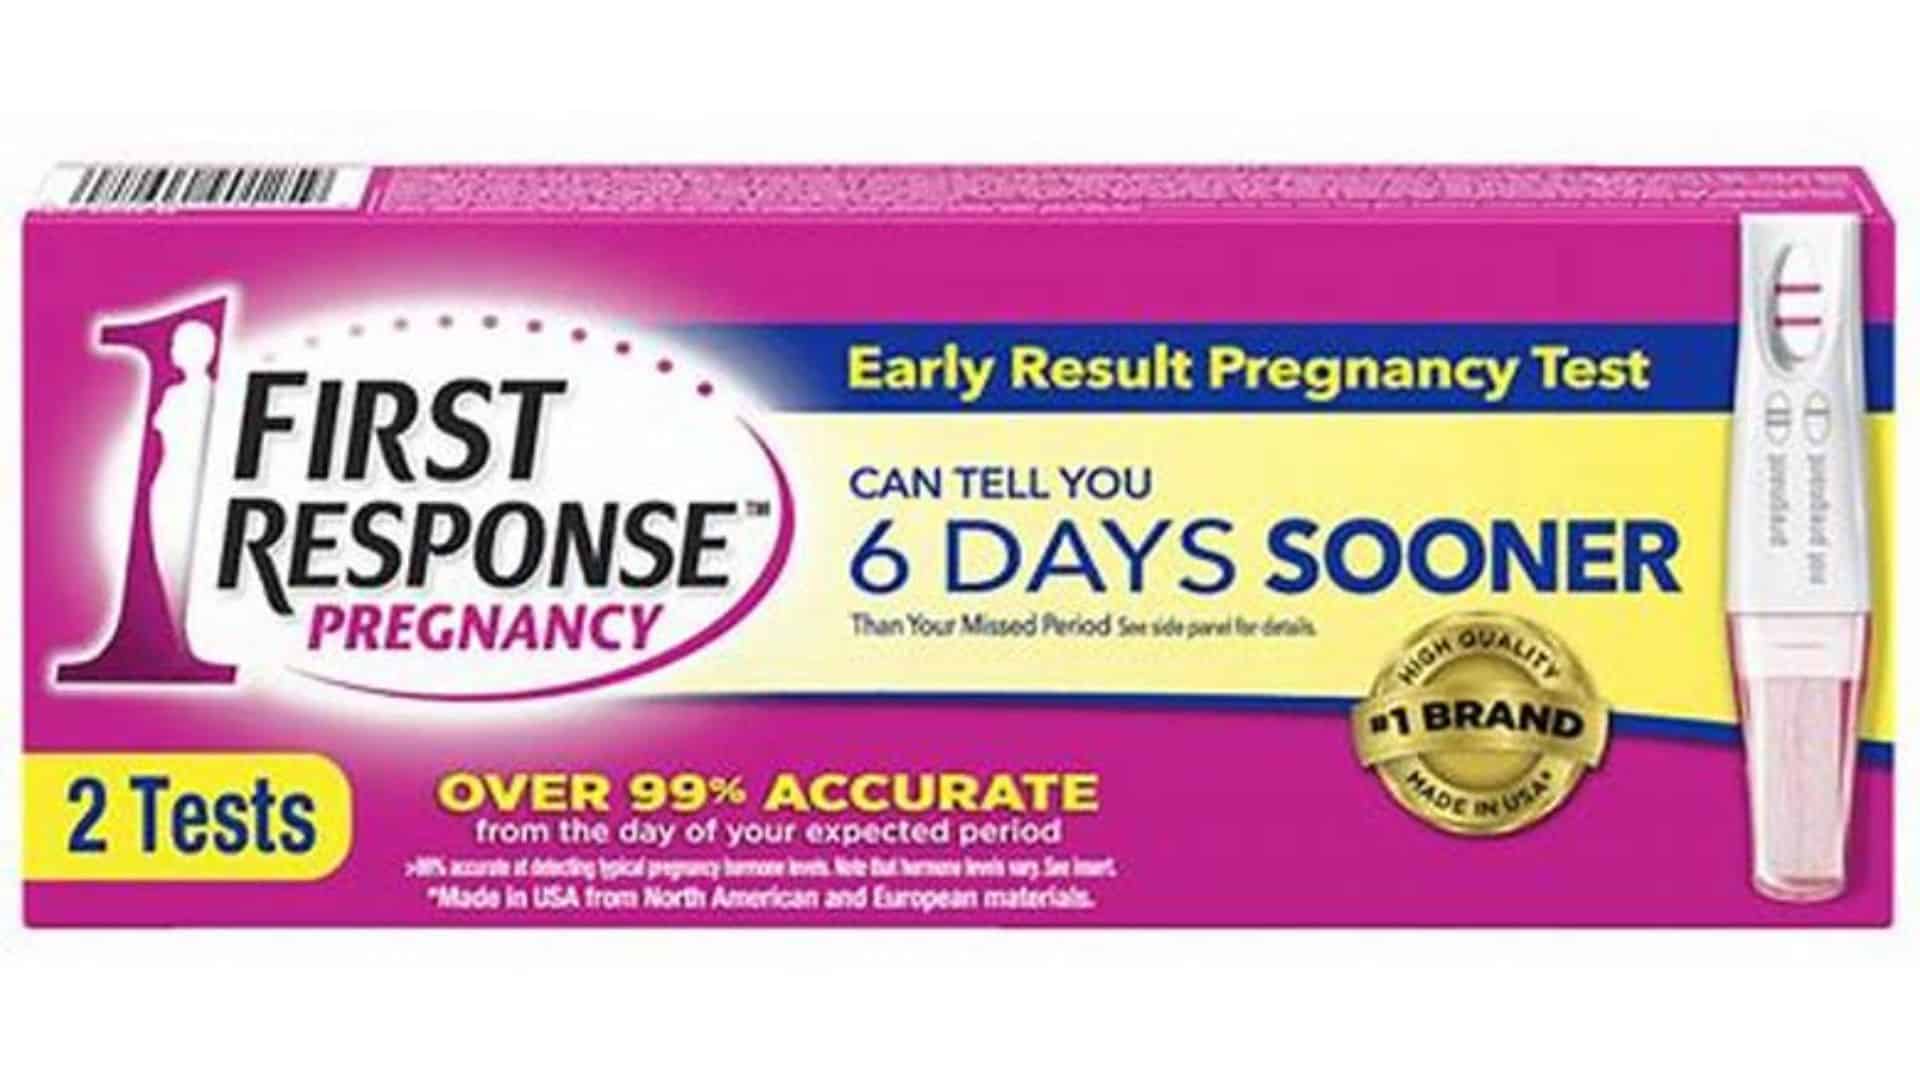 How to use First Response Early Result Pregnancy Test